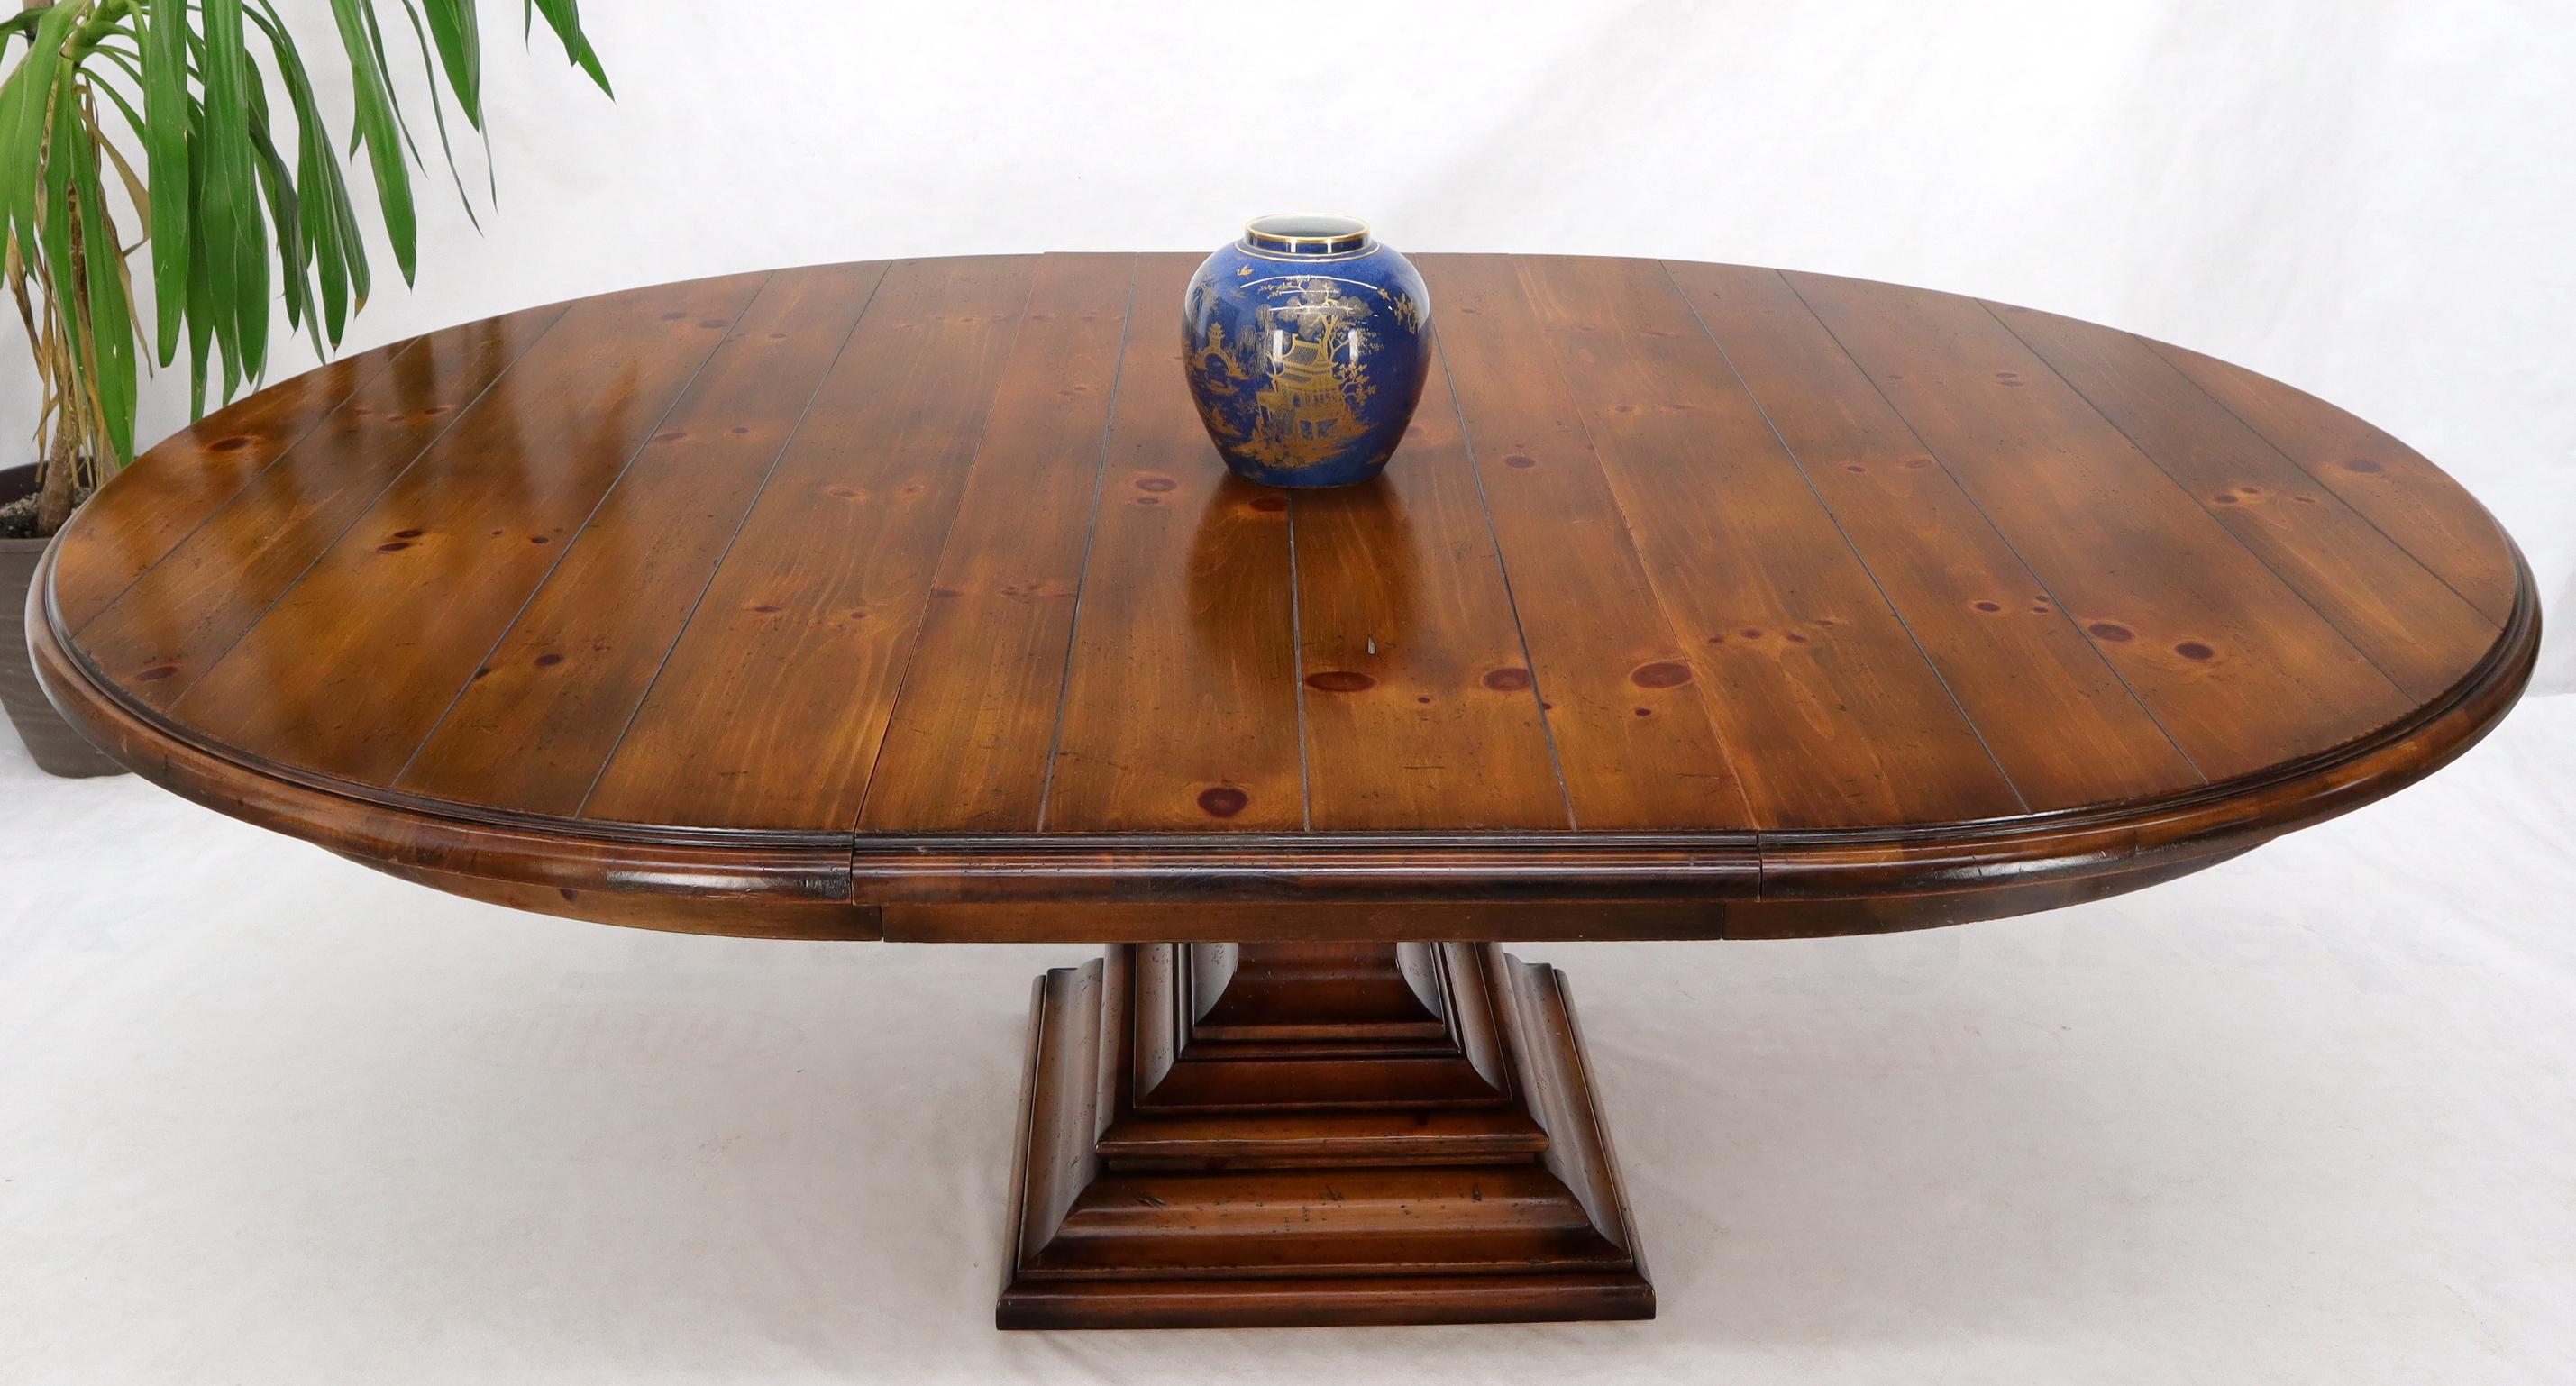 Large Round Colonial Spanish Square Base Pine Dining Table by Ralph Lauren 8